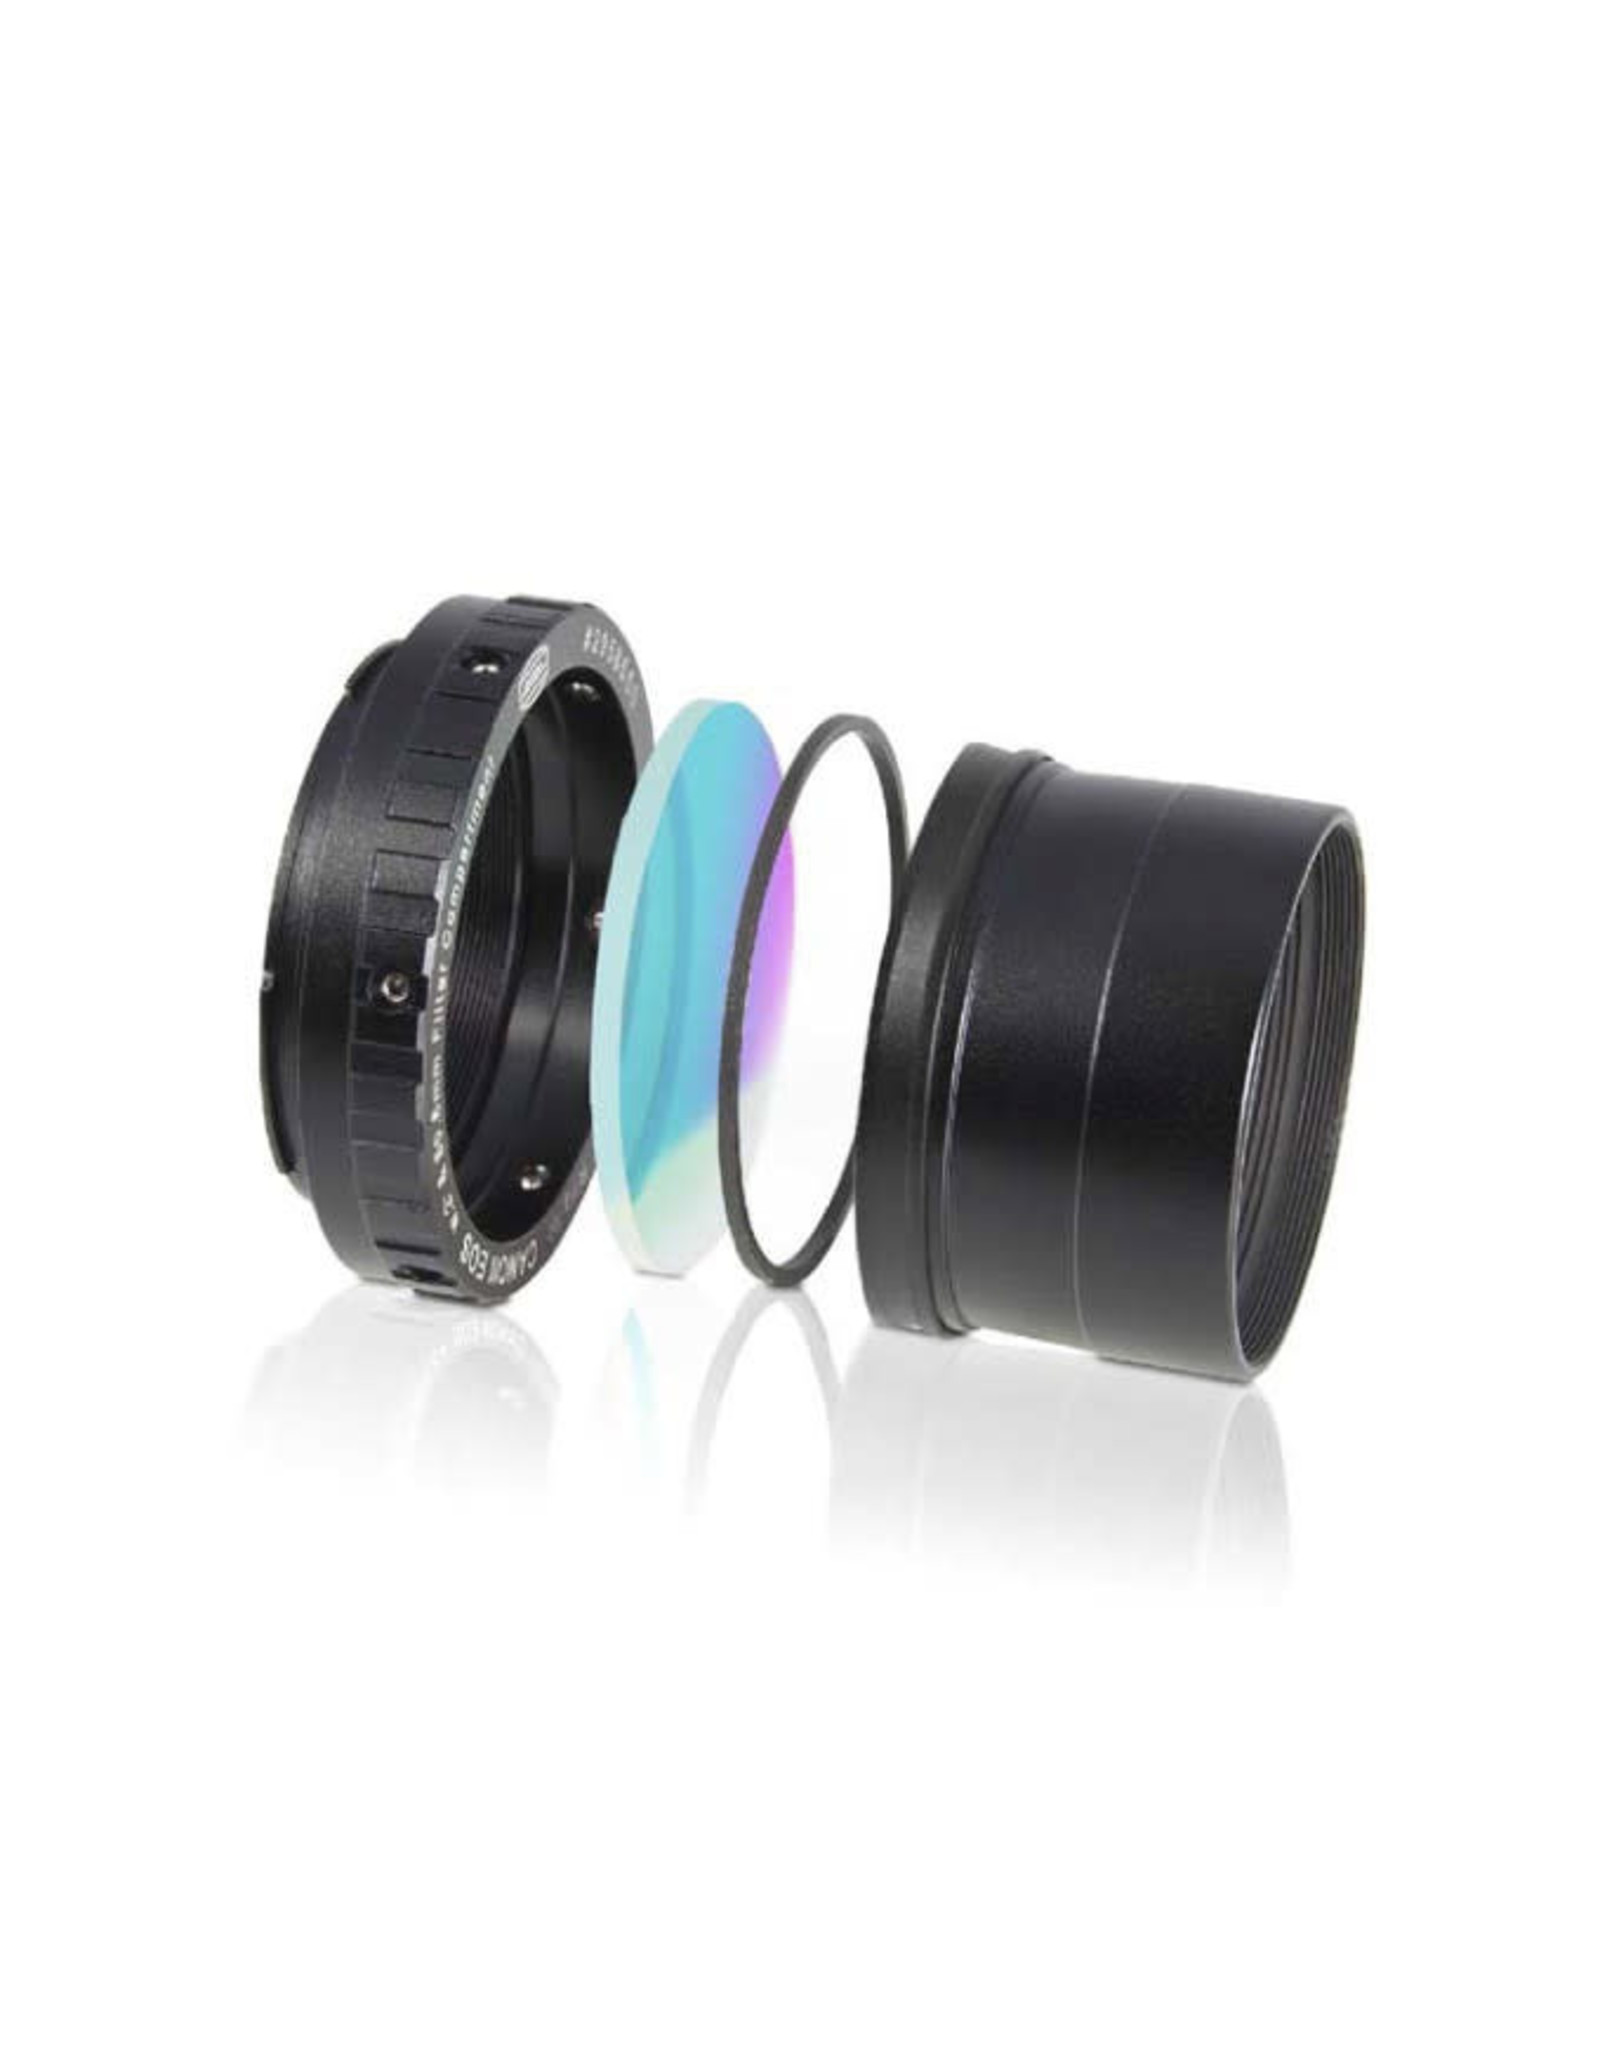 Baader Planetarium Baader EOS Protective Wide T-Ring with UHC-S Nebula Filter